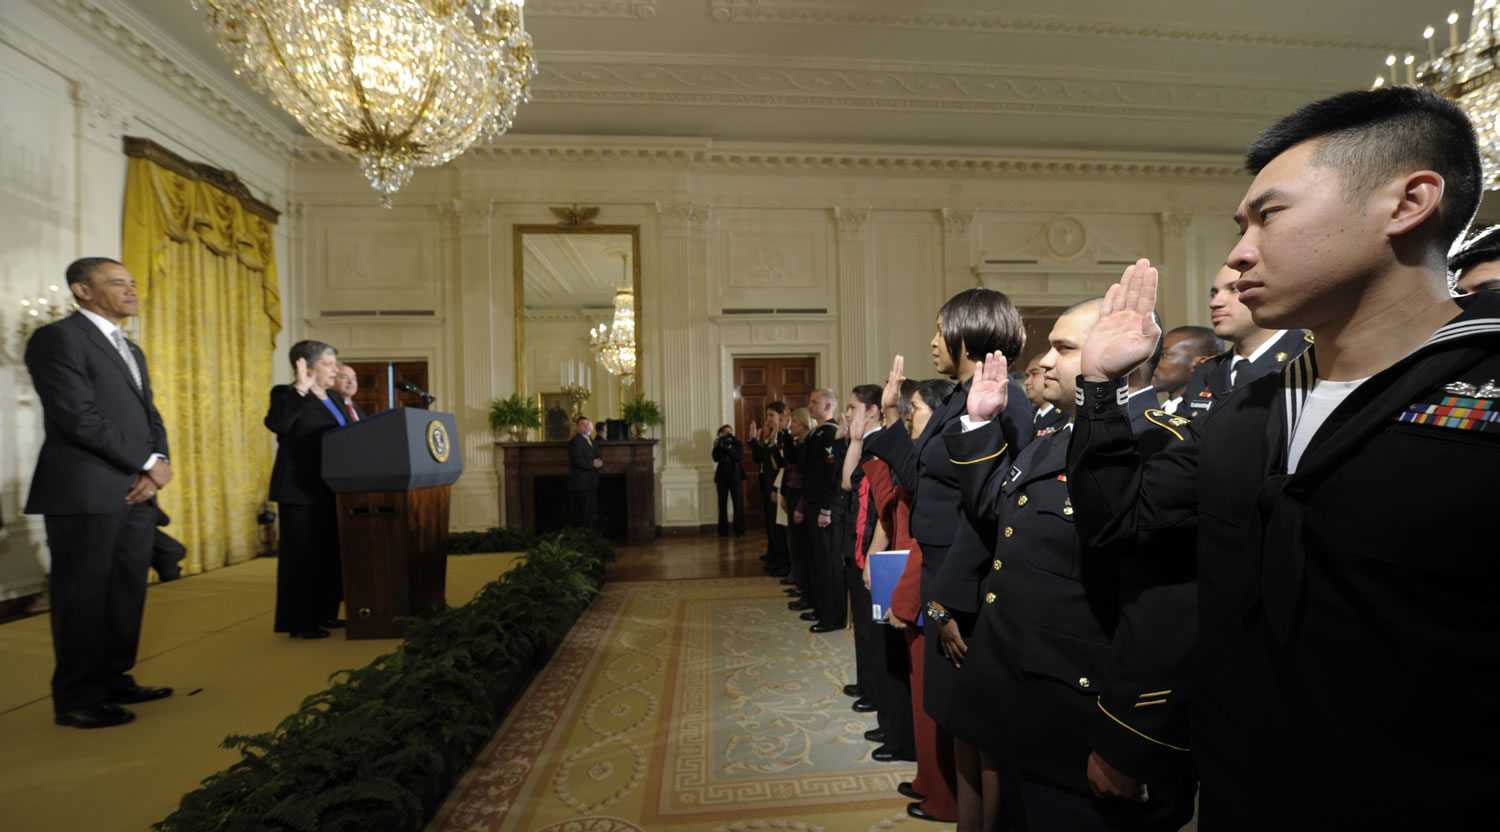 President Barack Obama listens as Homeland Security Secretary Janet Napolitano delivers the oath of allegiance during a naturalization ceremony for active duty service members and civilians, on Monday in the East Room of the White House in Washington.